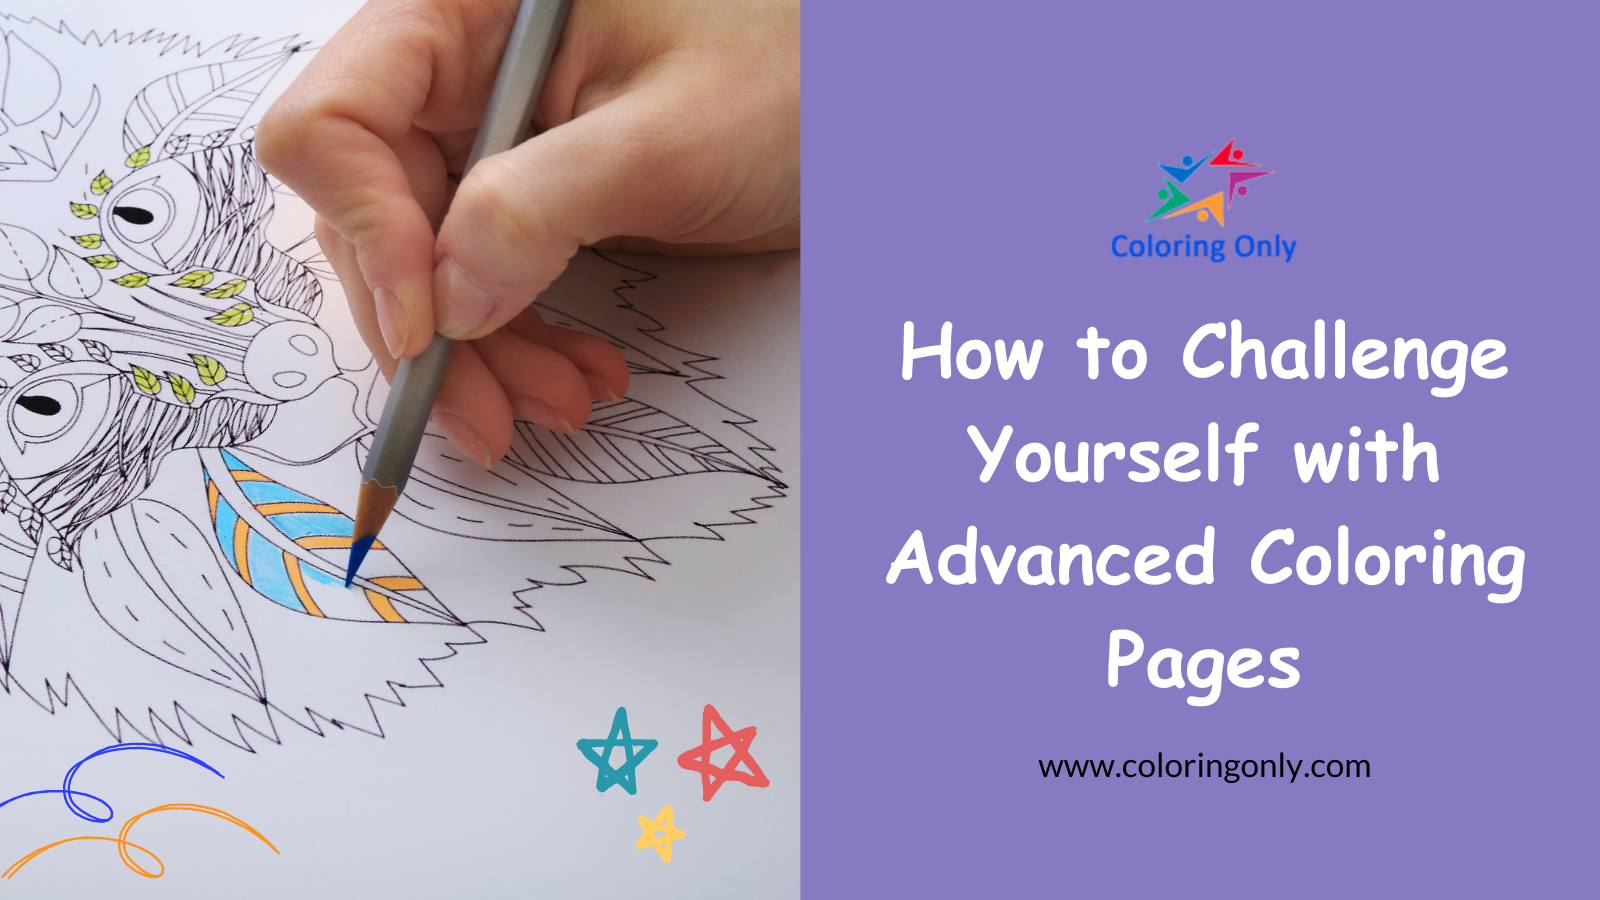 How to Challenge Yourself with Advanced Coloring Pages